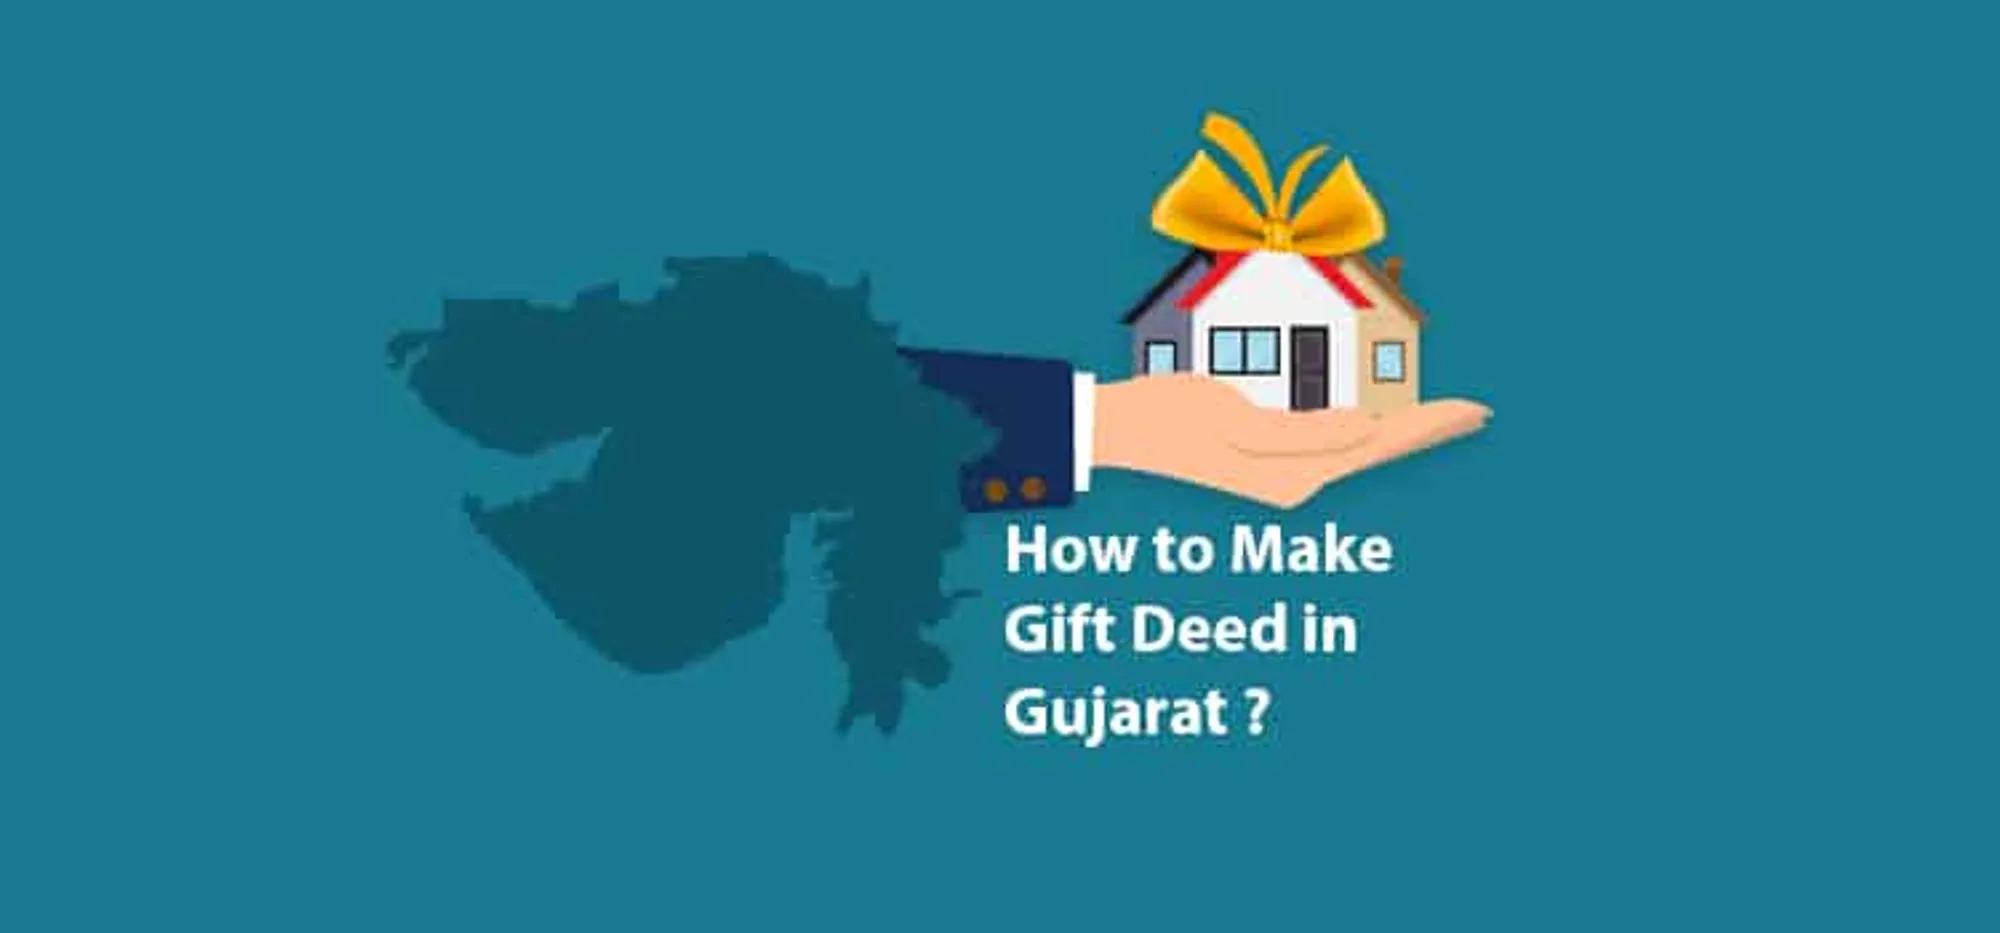 How to Make Gift Deed in Gujarat Front